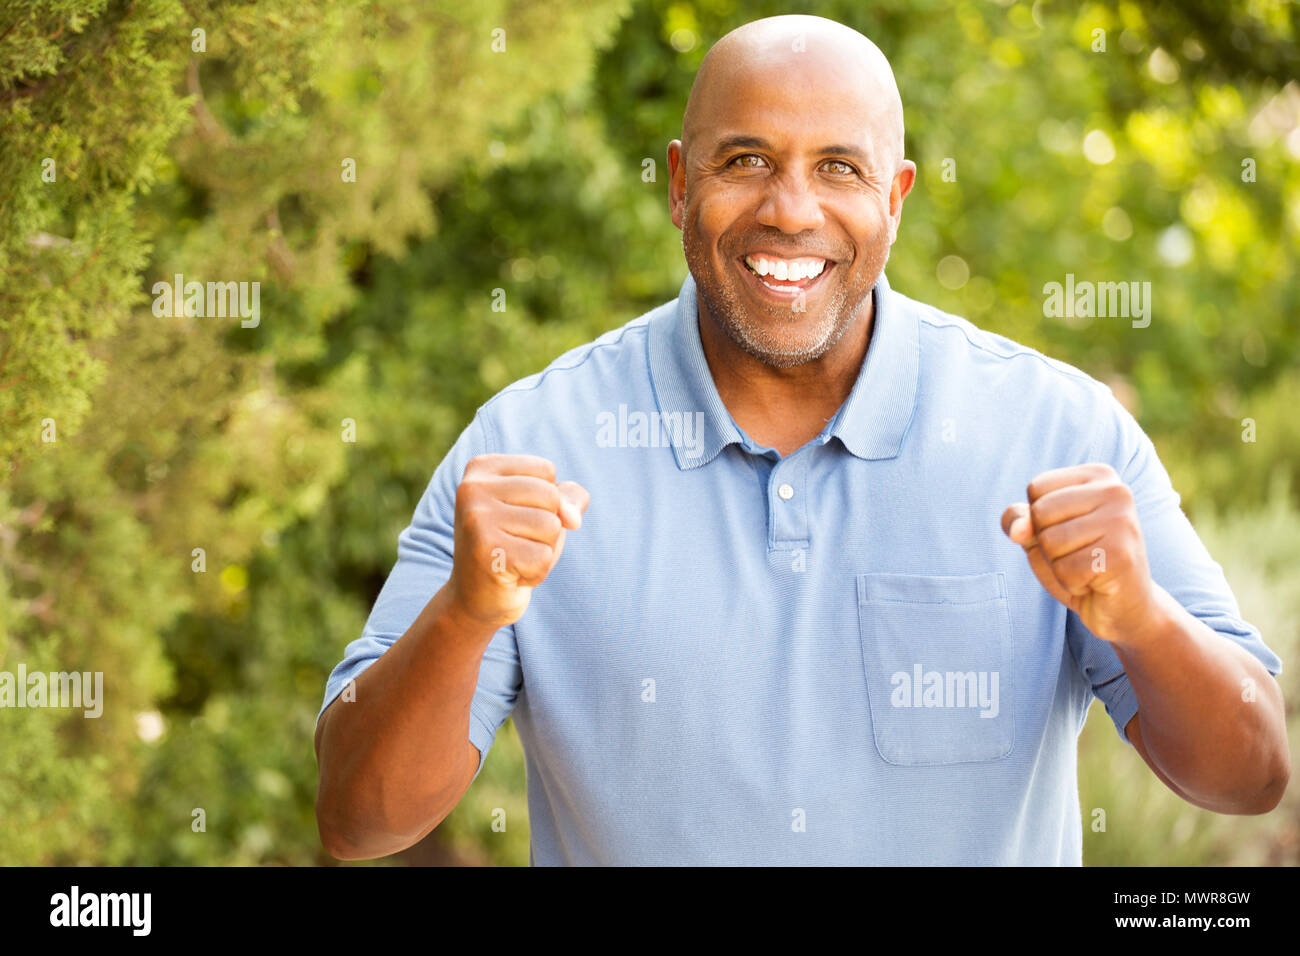 African American man pumping his fist. Stock Photo